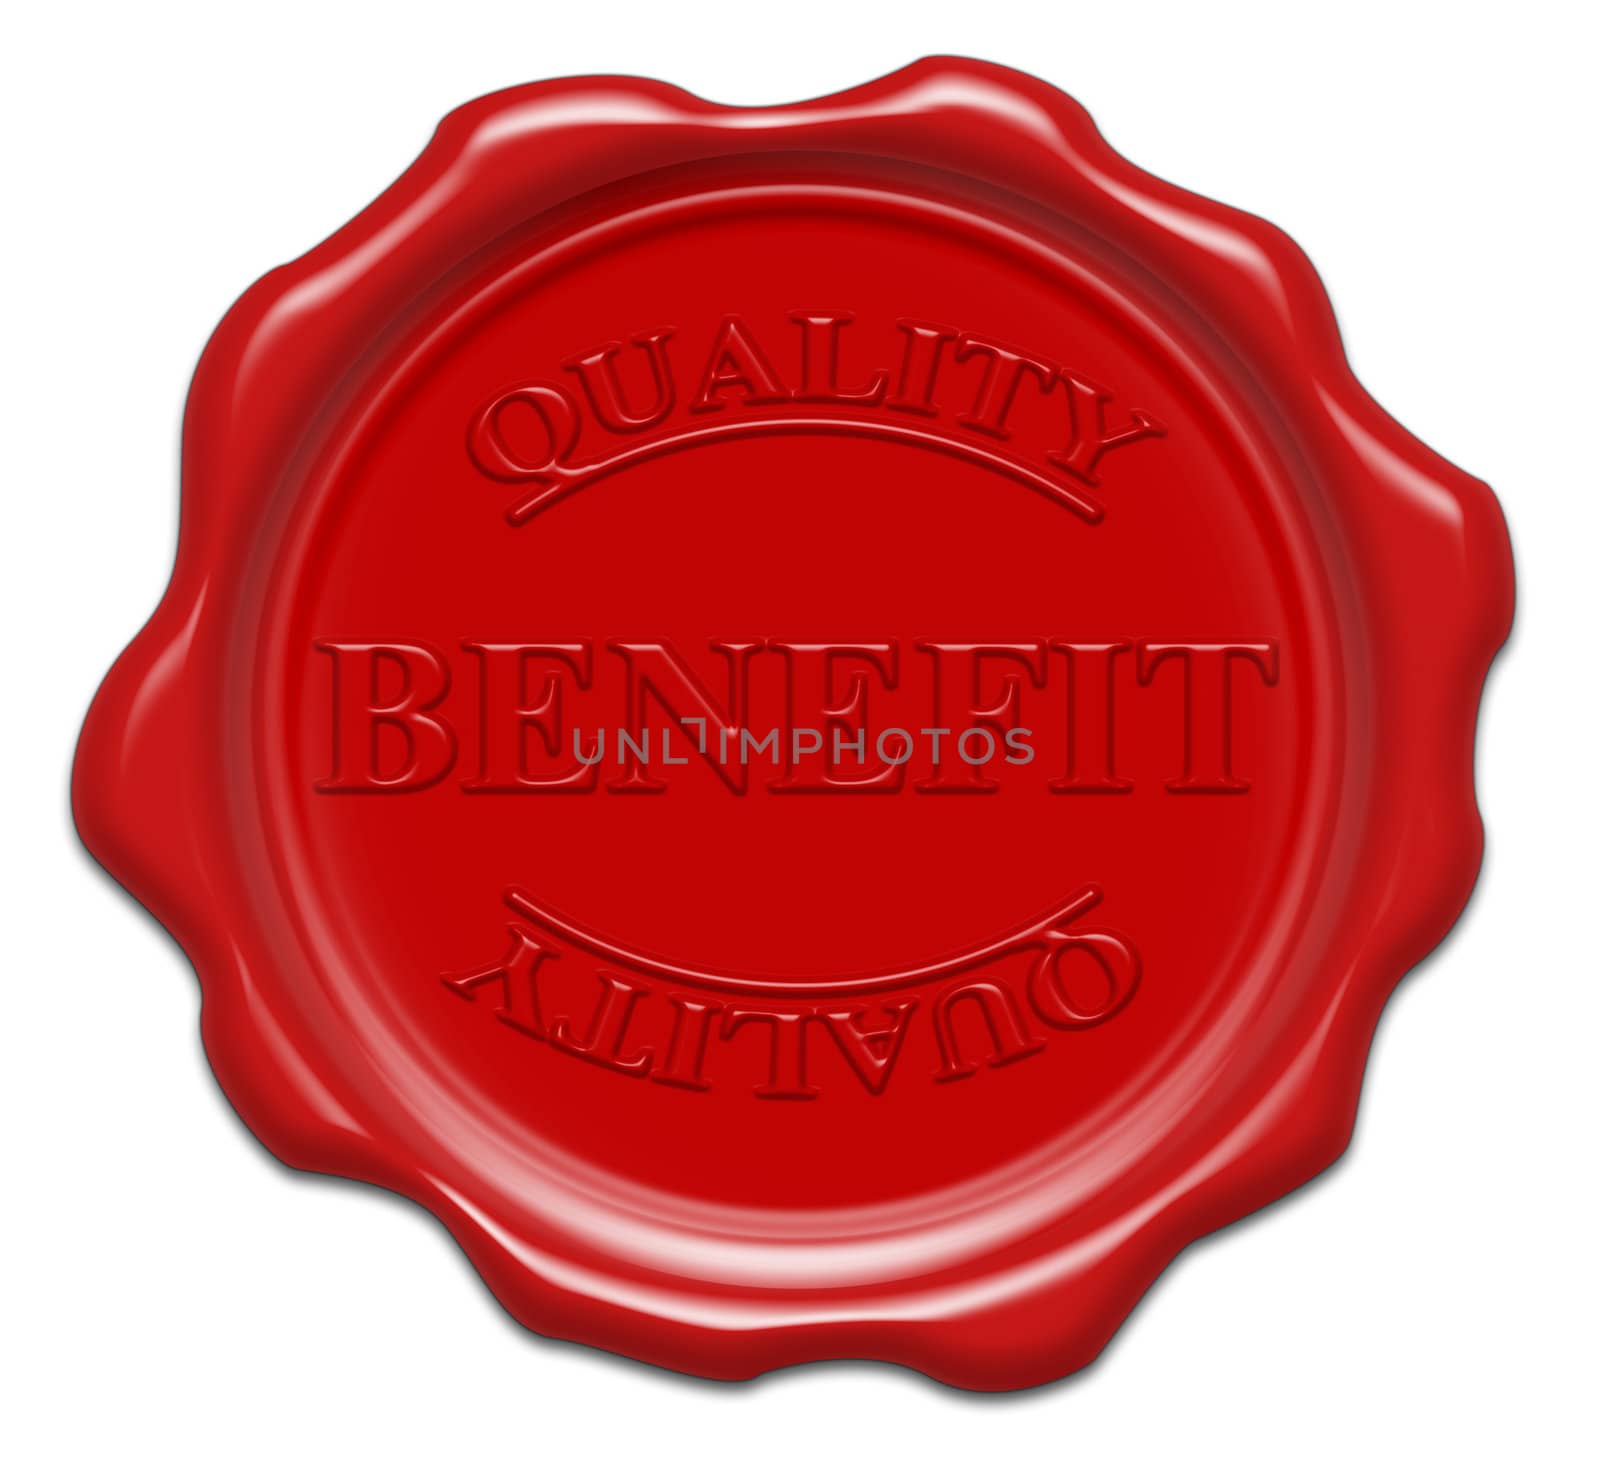 quality benefit - illustration red wax seal isolated on white ba by mozzyb